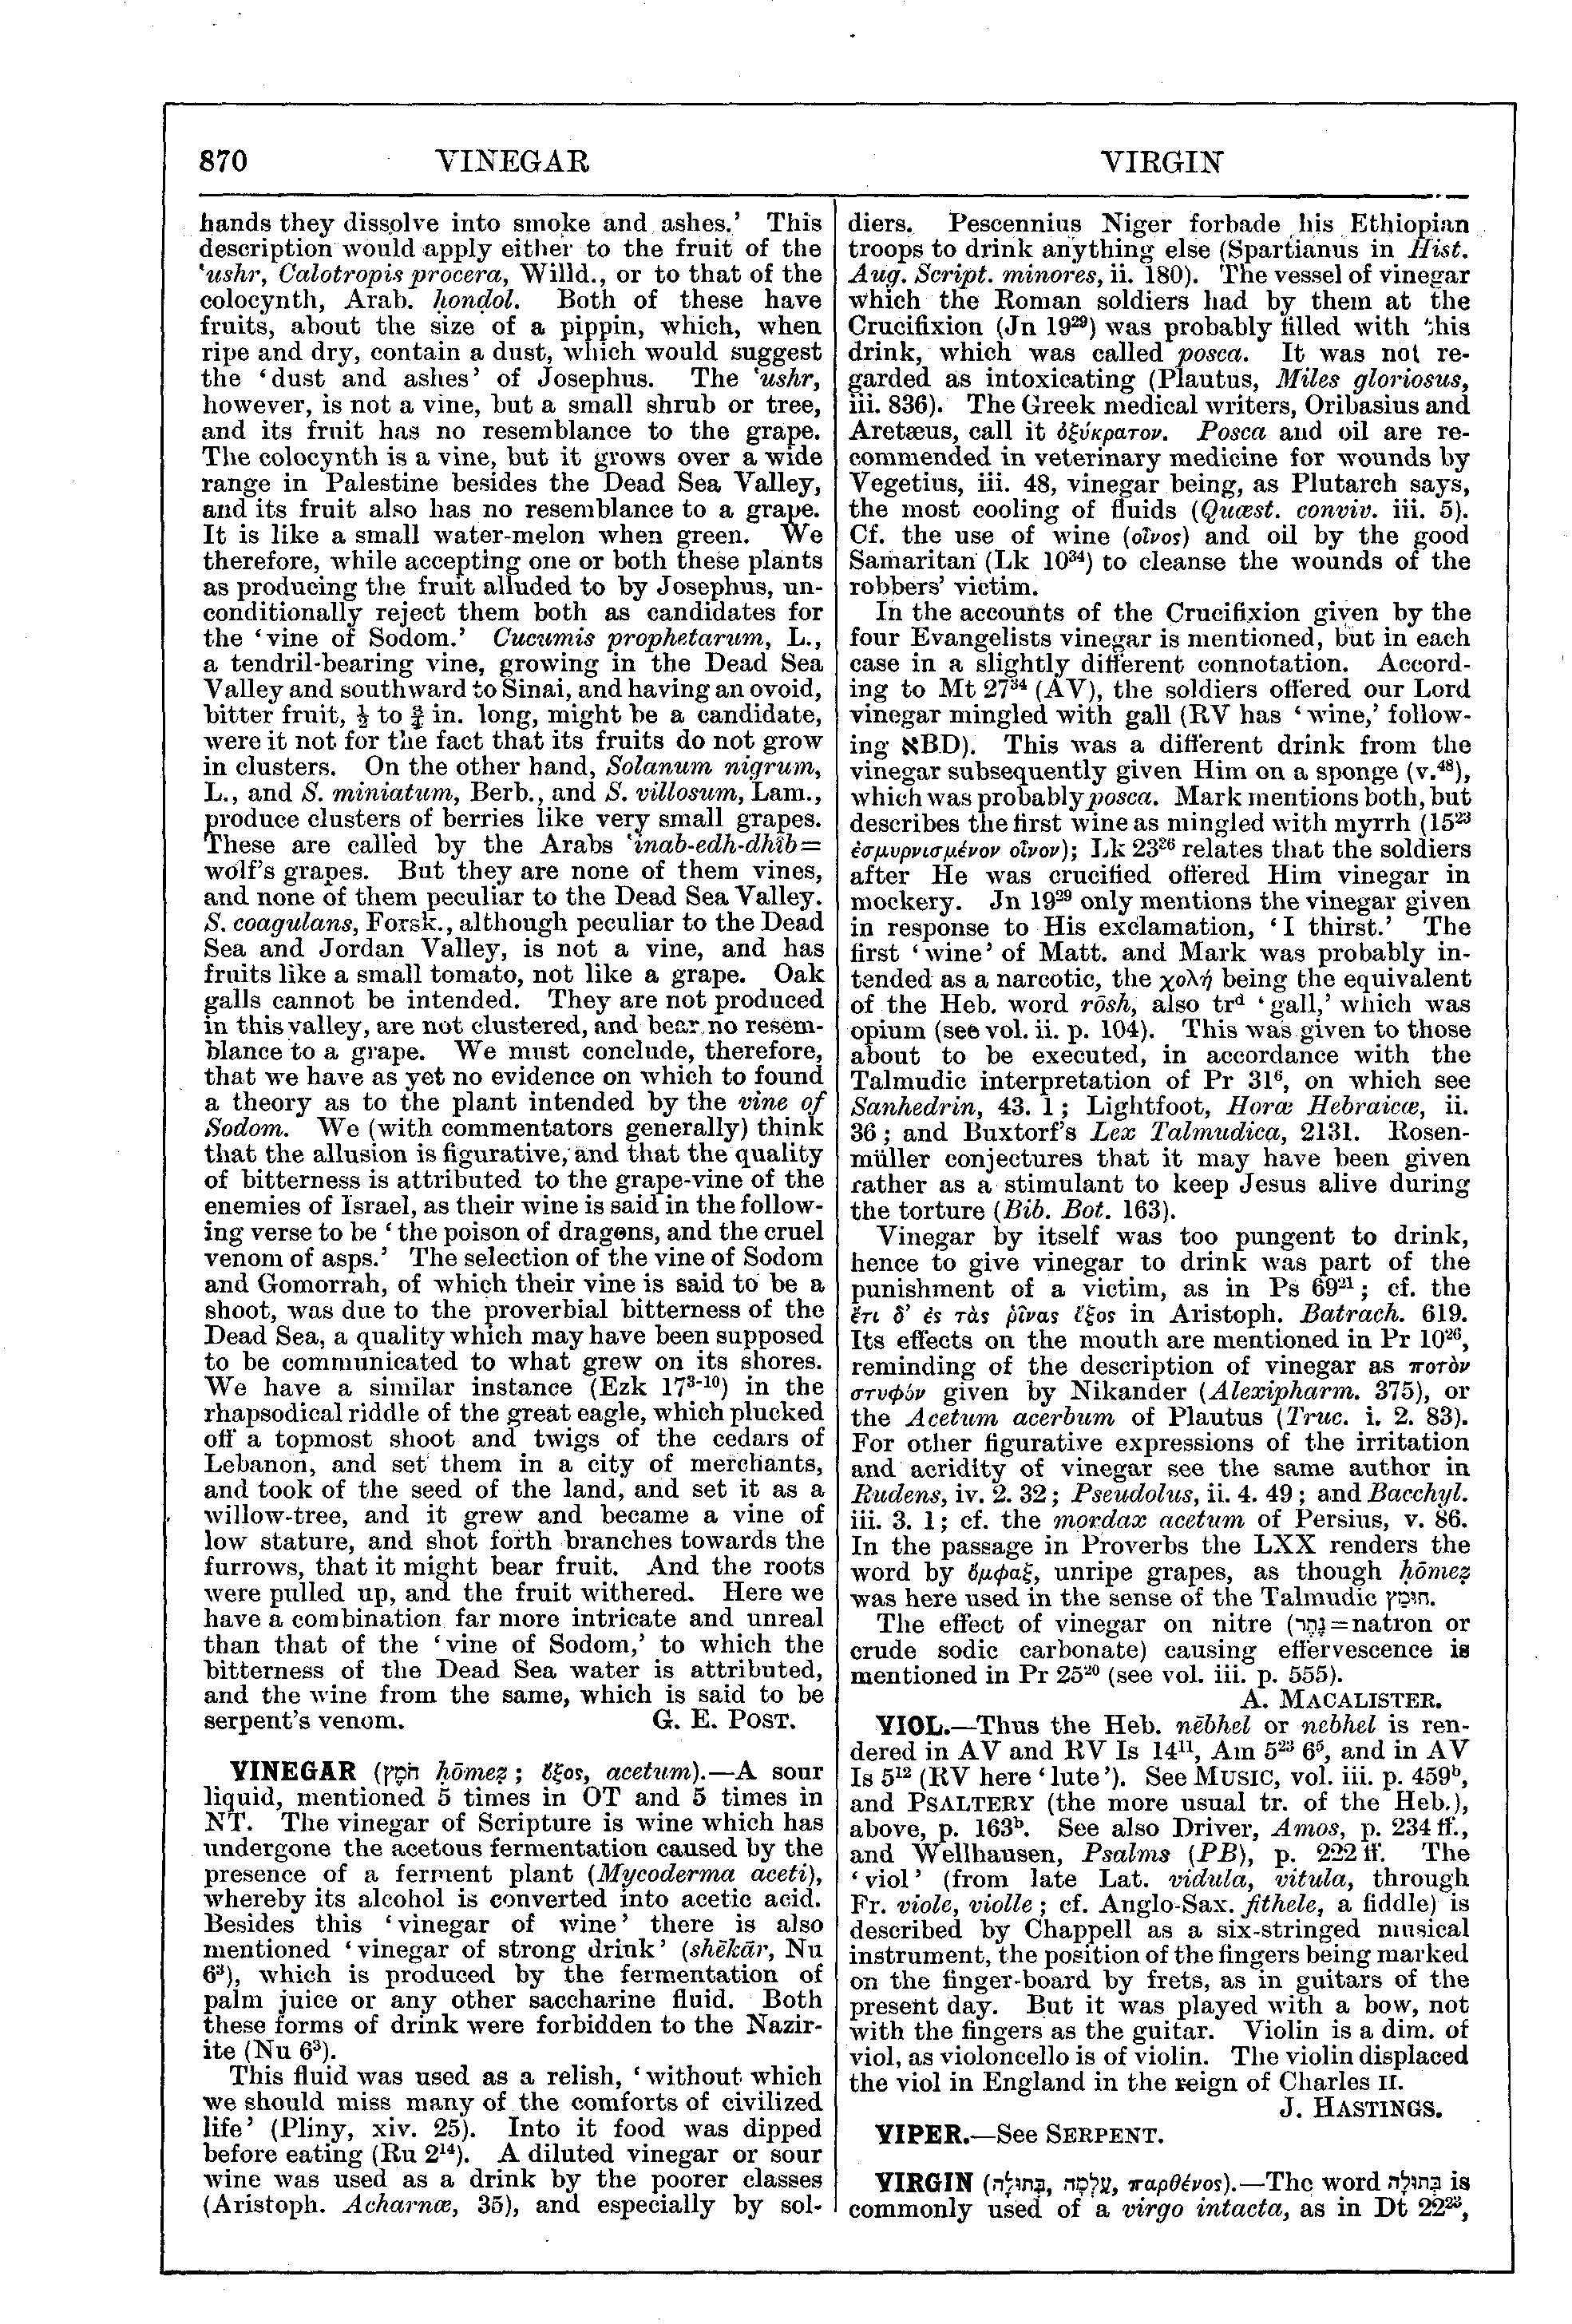 Image of page 870